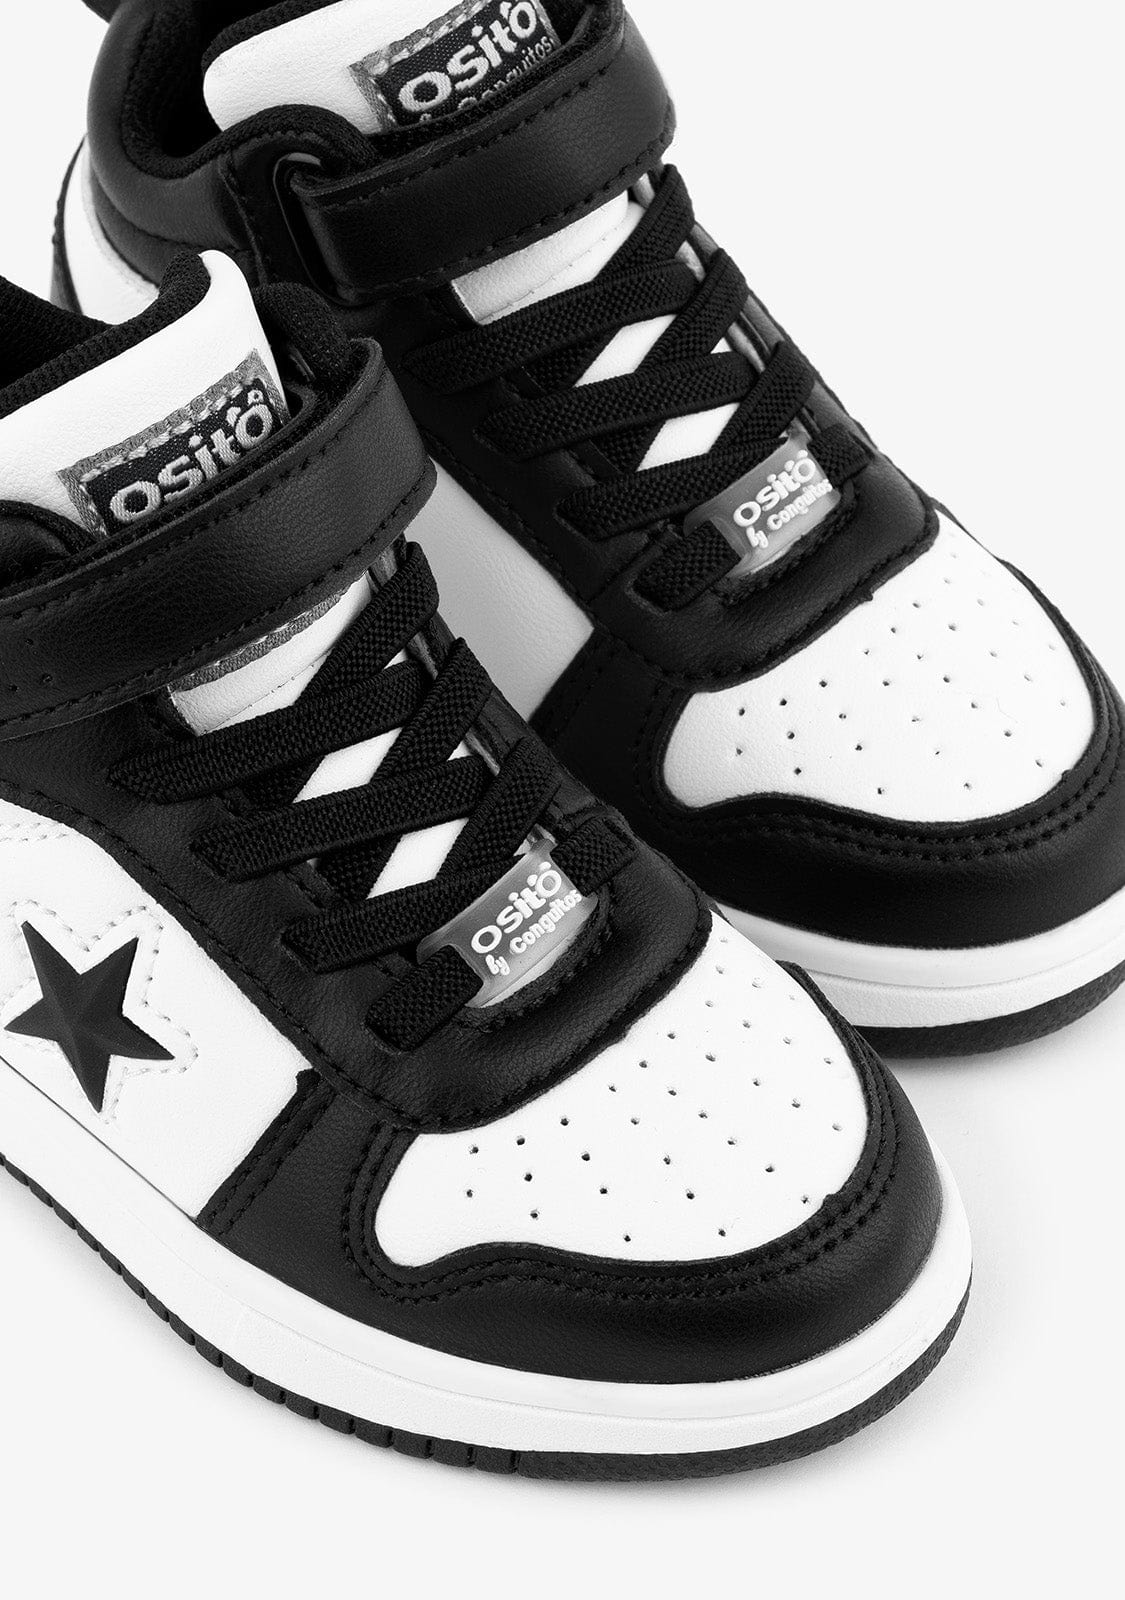 OSITO Shoes Baby's Black / White With Lights Hi-Top Sneakers